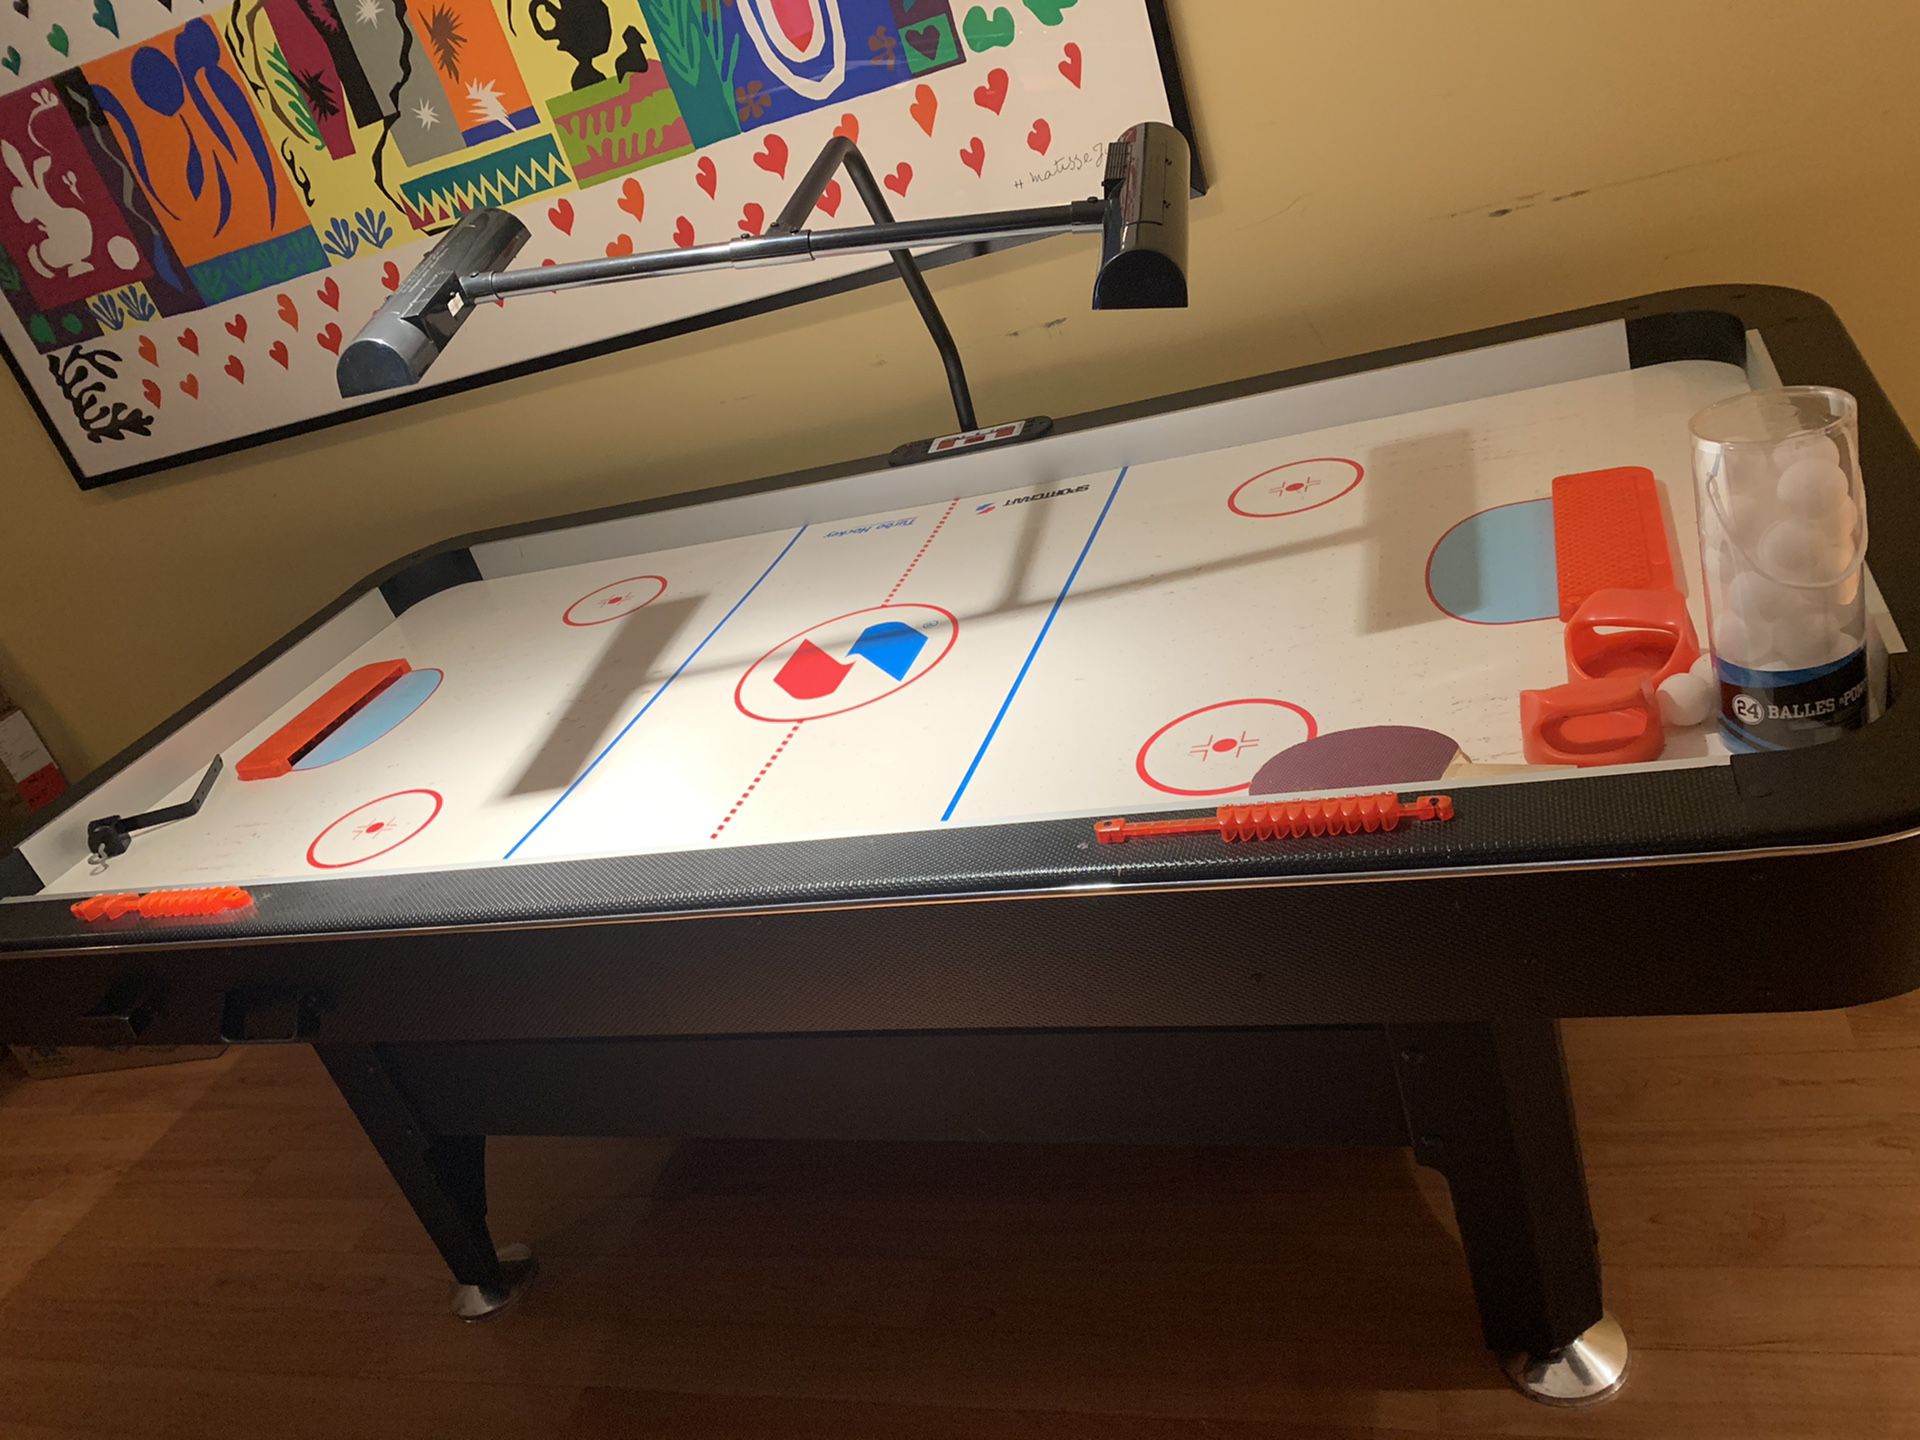 SPORTSCRAFT TURBO BOOST Air Hockey Table (orig $700) MUST GO BY TOMORROW. MAKE YOUR OFFER